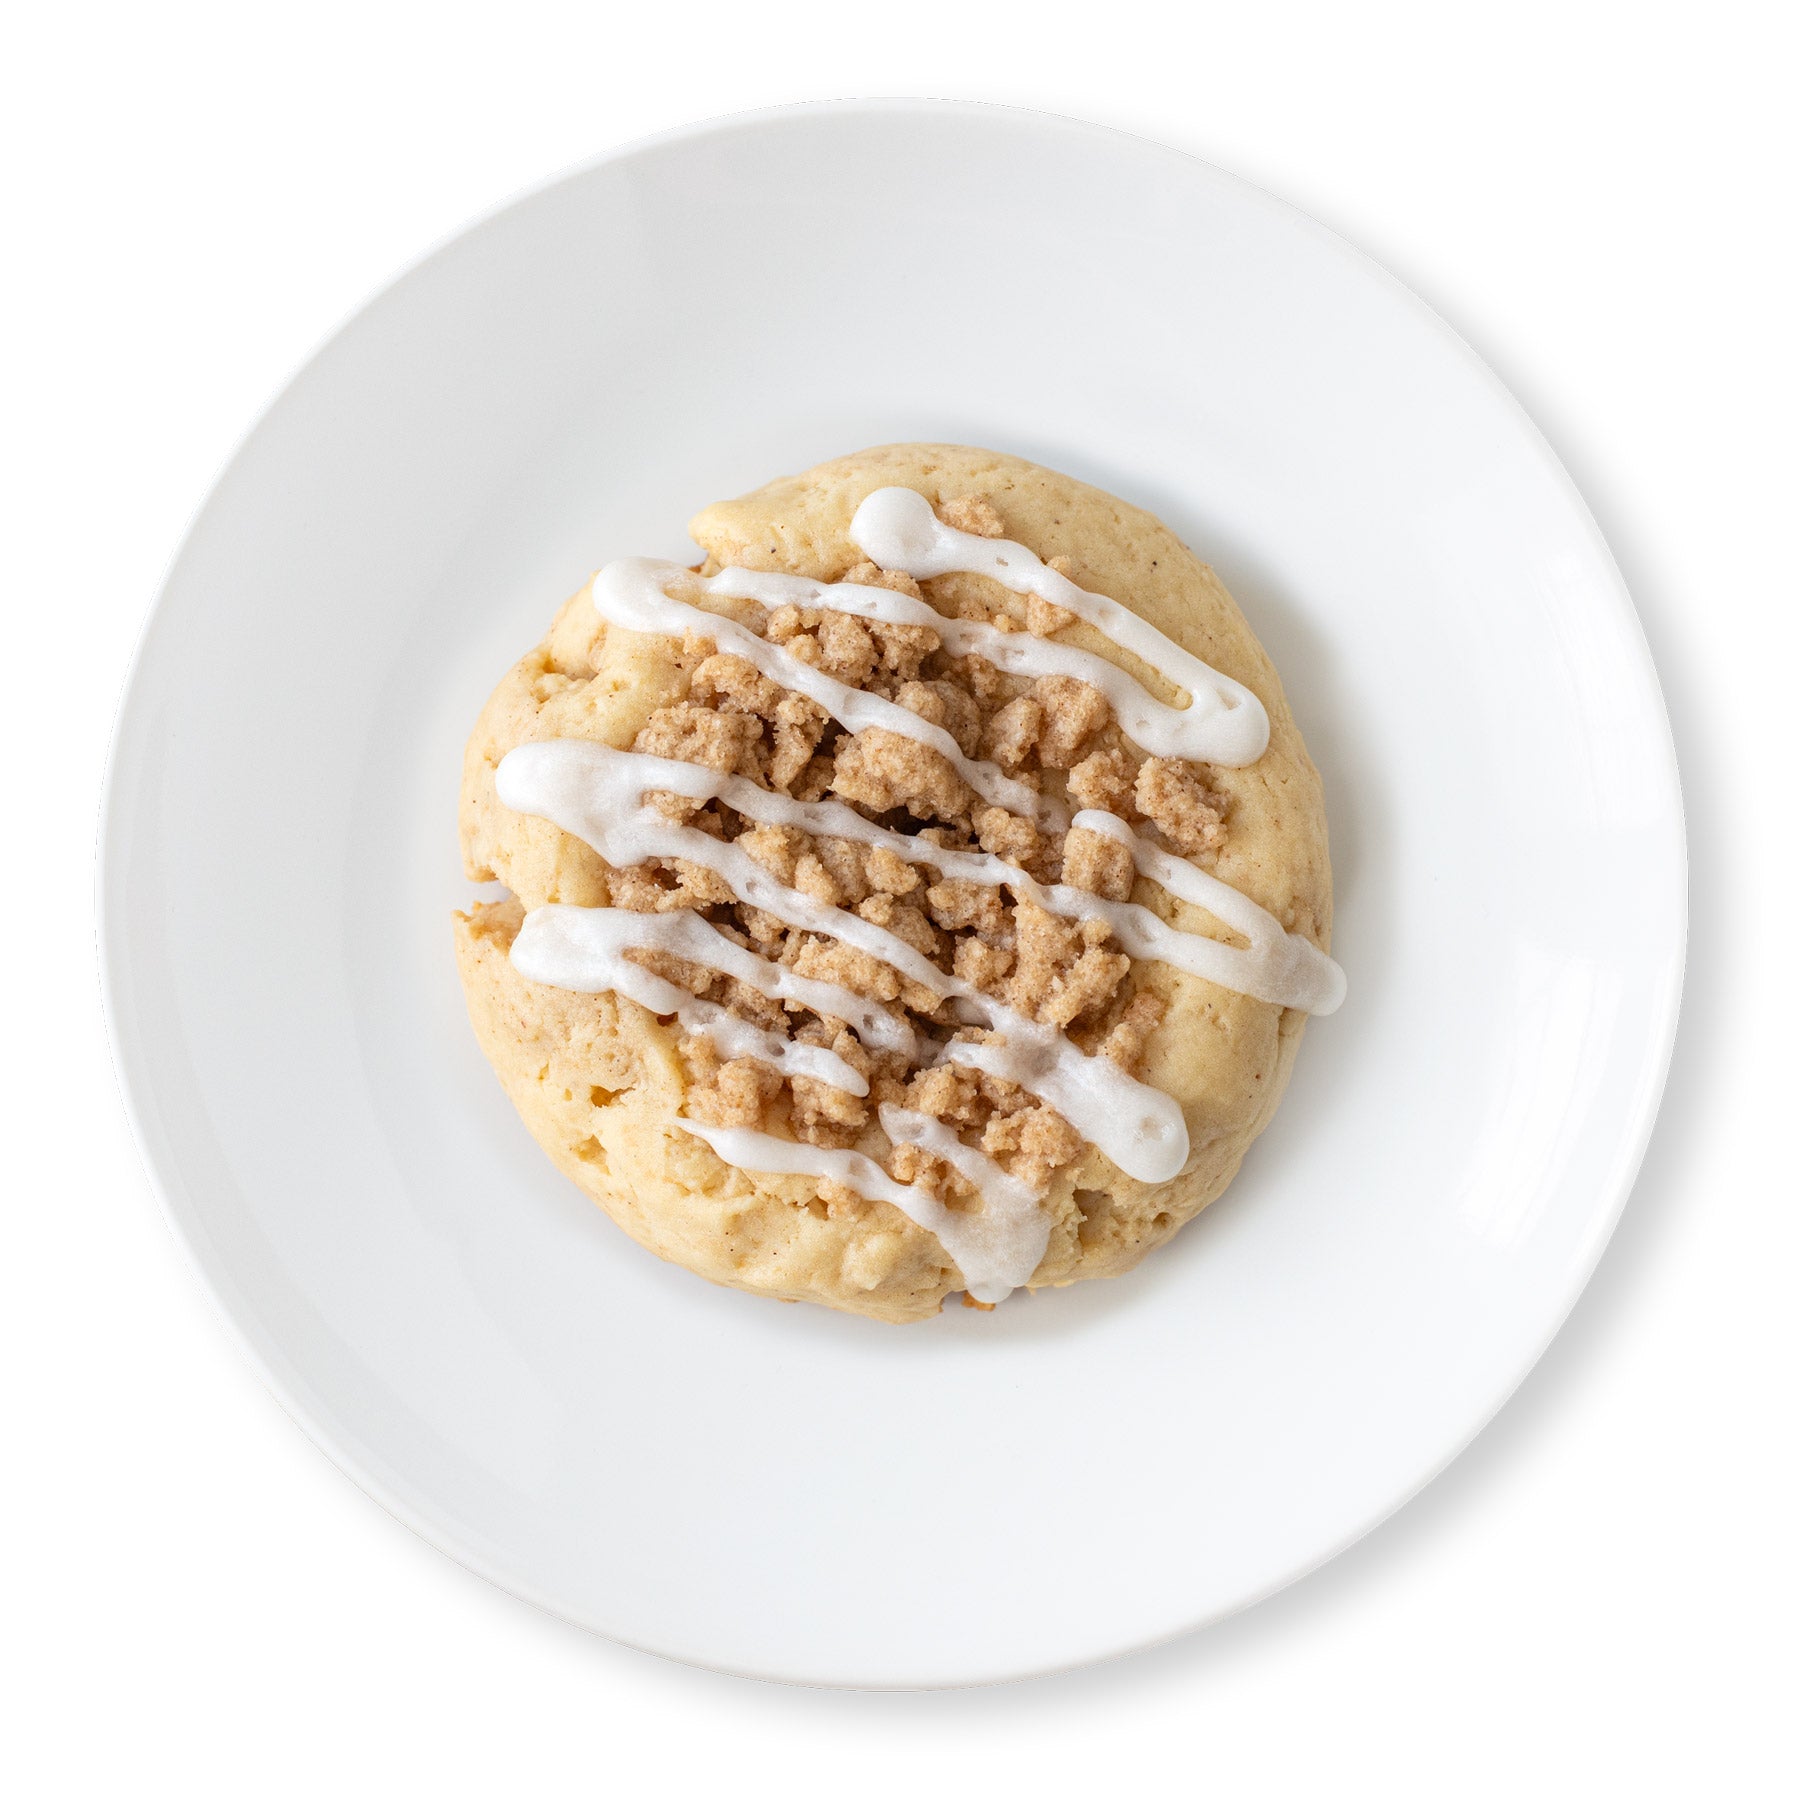 Overhead view of a Crumb Cake Cookie with a crumbly streusel topping and a vanilla glaze drizzle on a white plate.